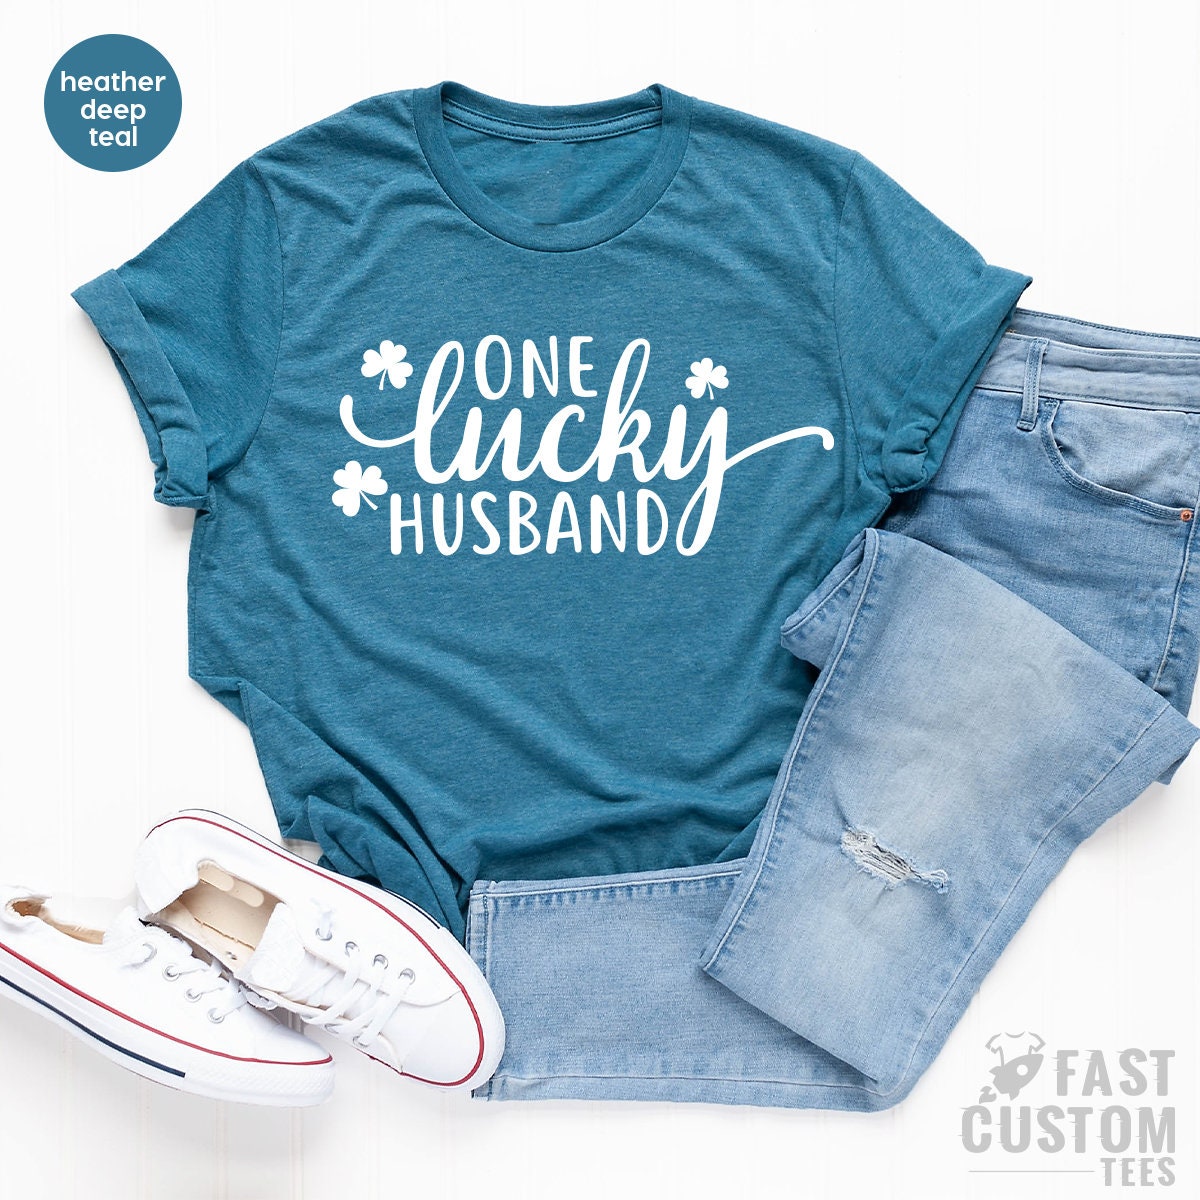 One Lucky Husband Shirt, Husband T Shirt, Gift From Wife, Husband Gifts, Father's Day Shirt, Valentine's Day Shirt, Best Husband TShirt - Fastdeliverytees.com